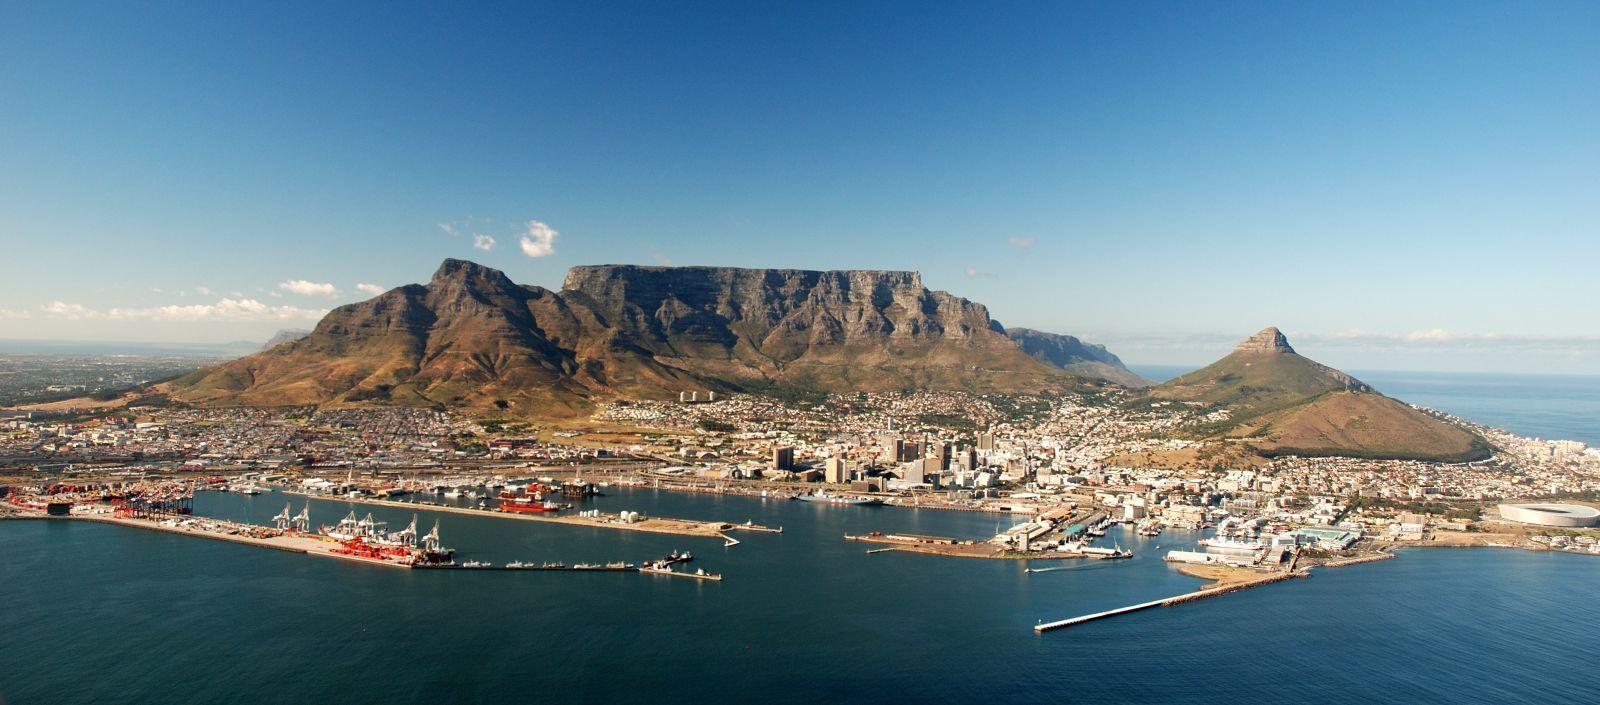 Table mountain in cape town south africa wallpaper Stock Free Image